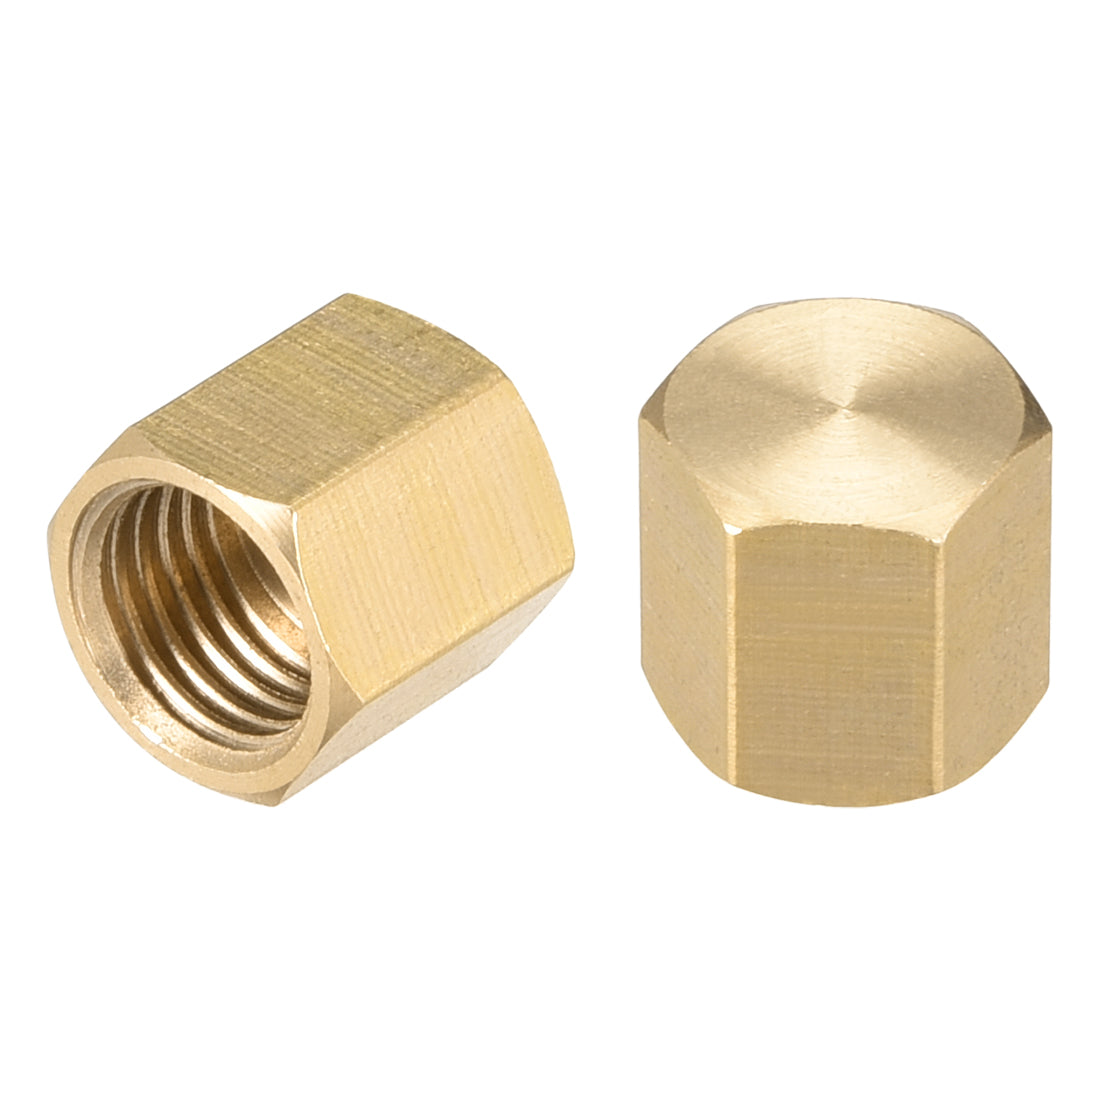 Uxcell Uxcell Brass Female Pipe Fitting Valve Cap 1/8NPT Hex Head End Plug Connector 4pcs